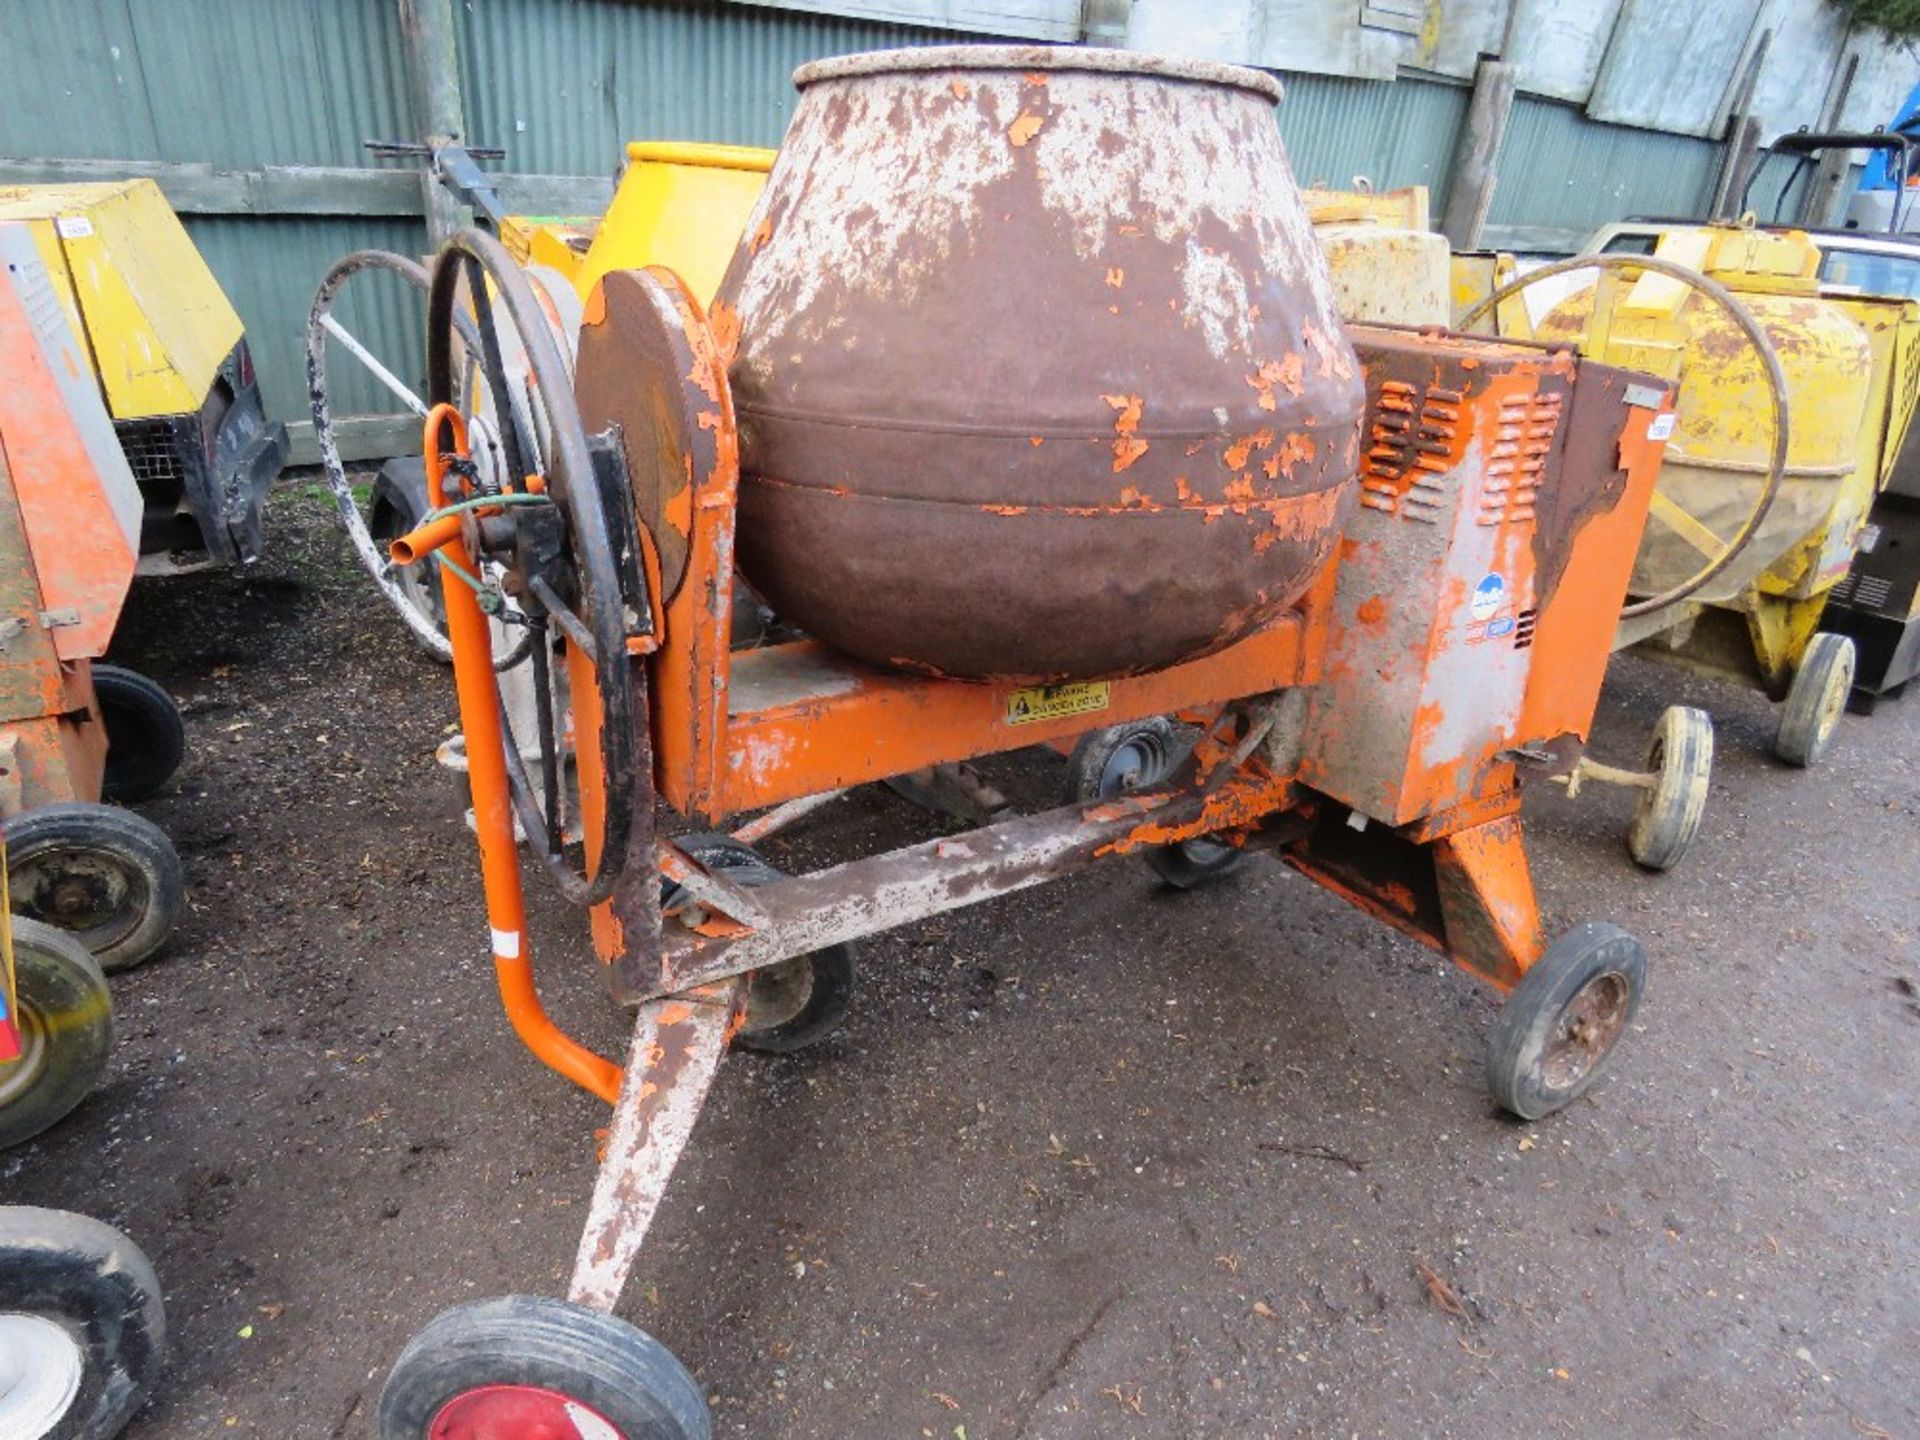 BELLE 100T LISTER HANDLE ENGINED CEMENT MIXER. WHEN TESTED WAS SEEN TO RUN AND DRUM TURNED.